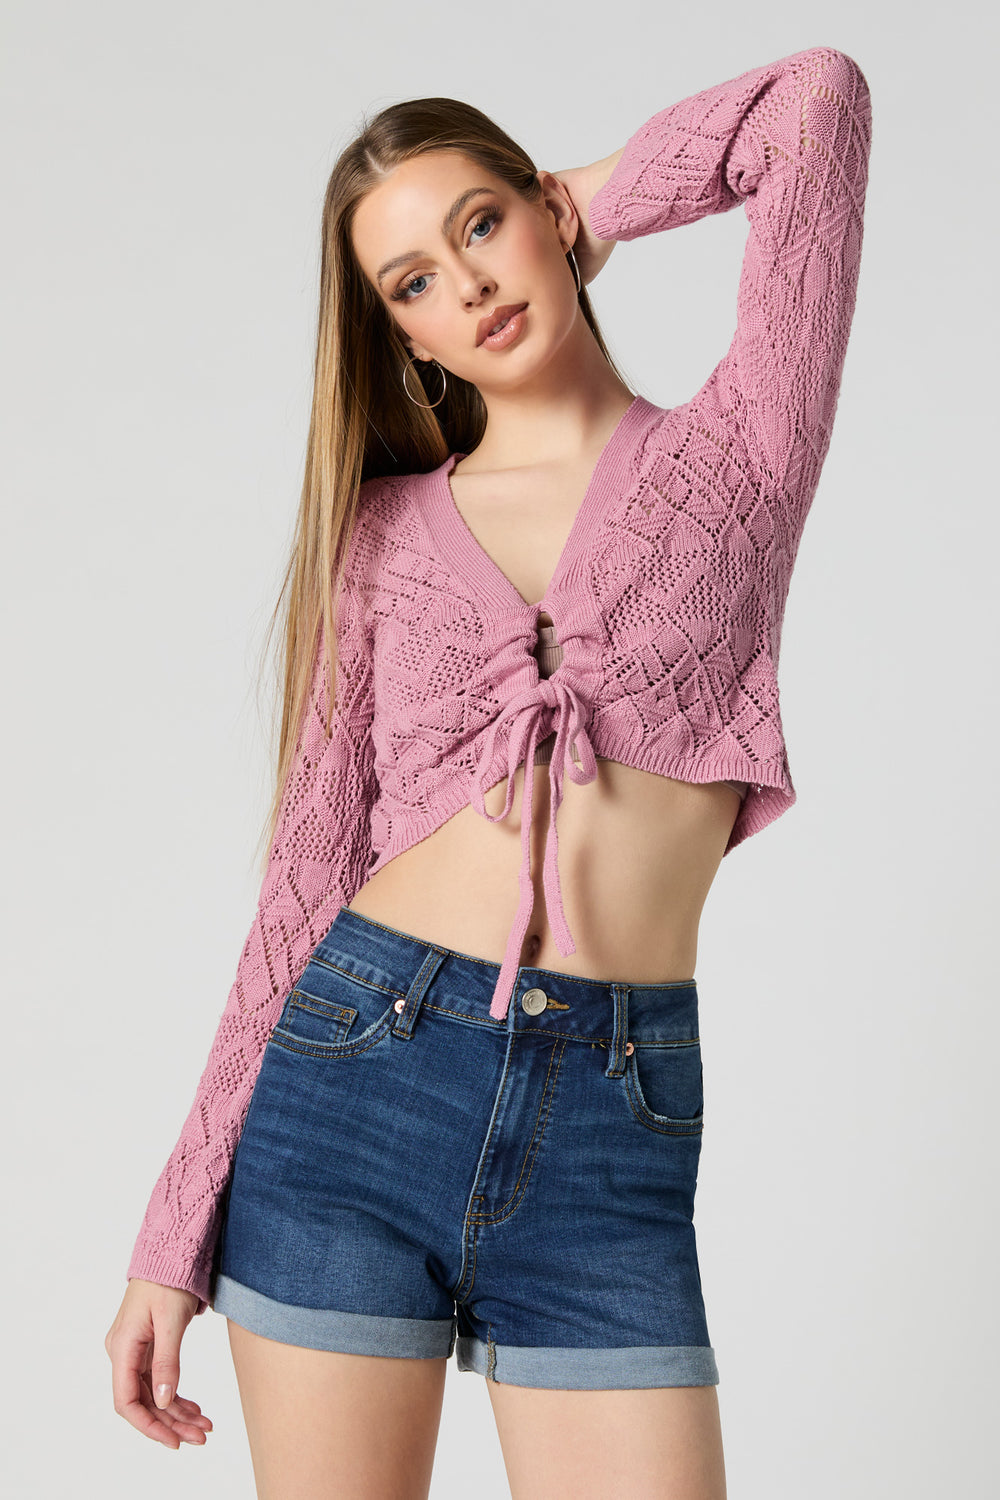 Crochet Front Tie Cropped Long Sleeve Top Crochet Front Tie Cropped Long Sleeve Top 1